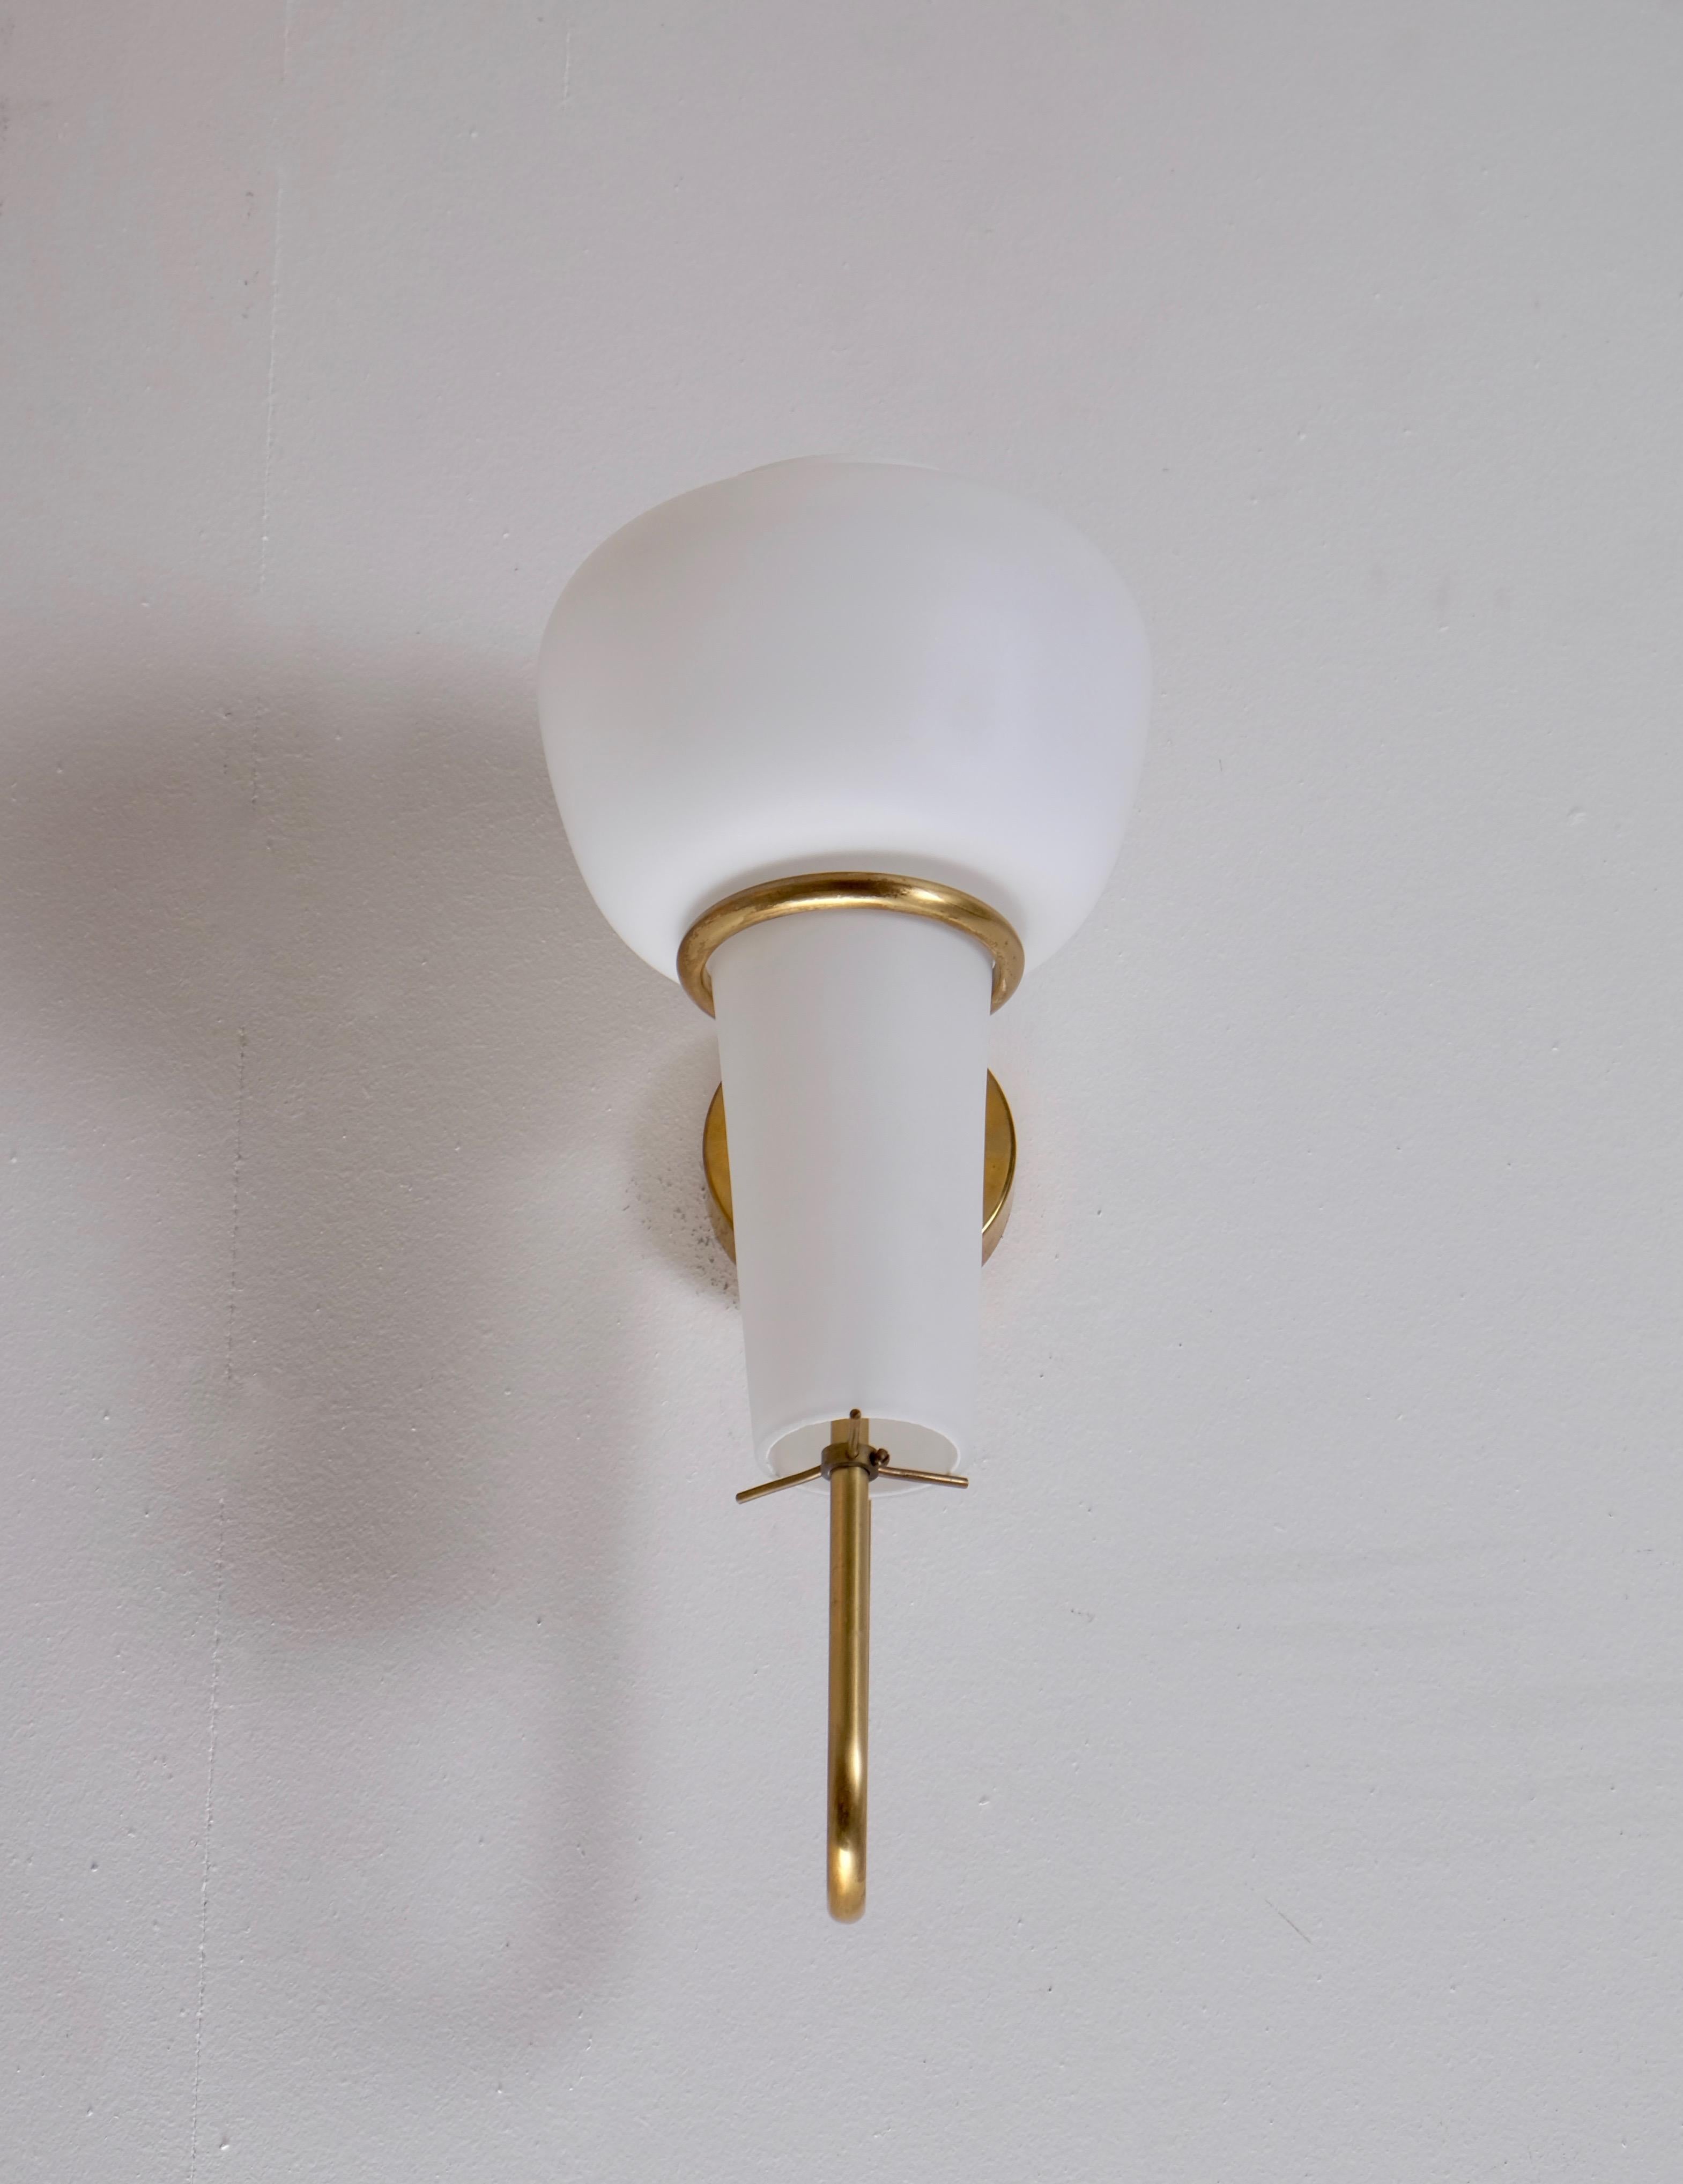 Rare opaline glass wall light produced and designed by Hans-Agne Jakobsson, Markaryd, Sweden, 1950s.
Measure: Height 40 cm.